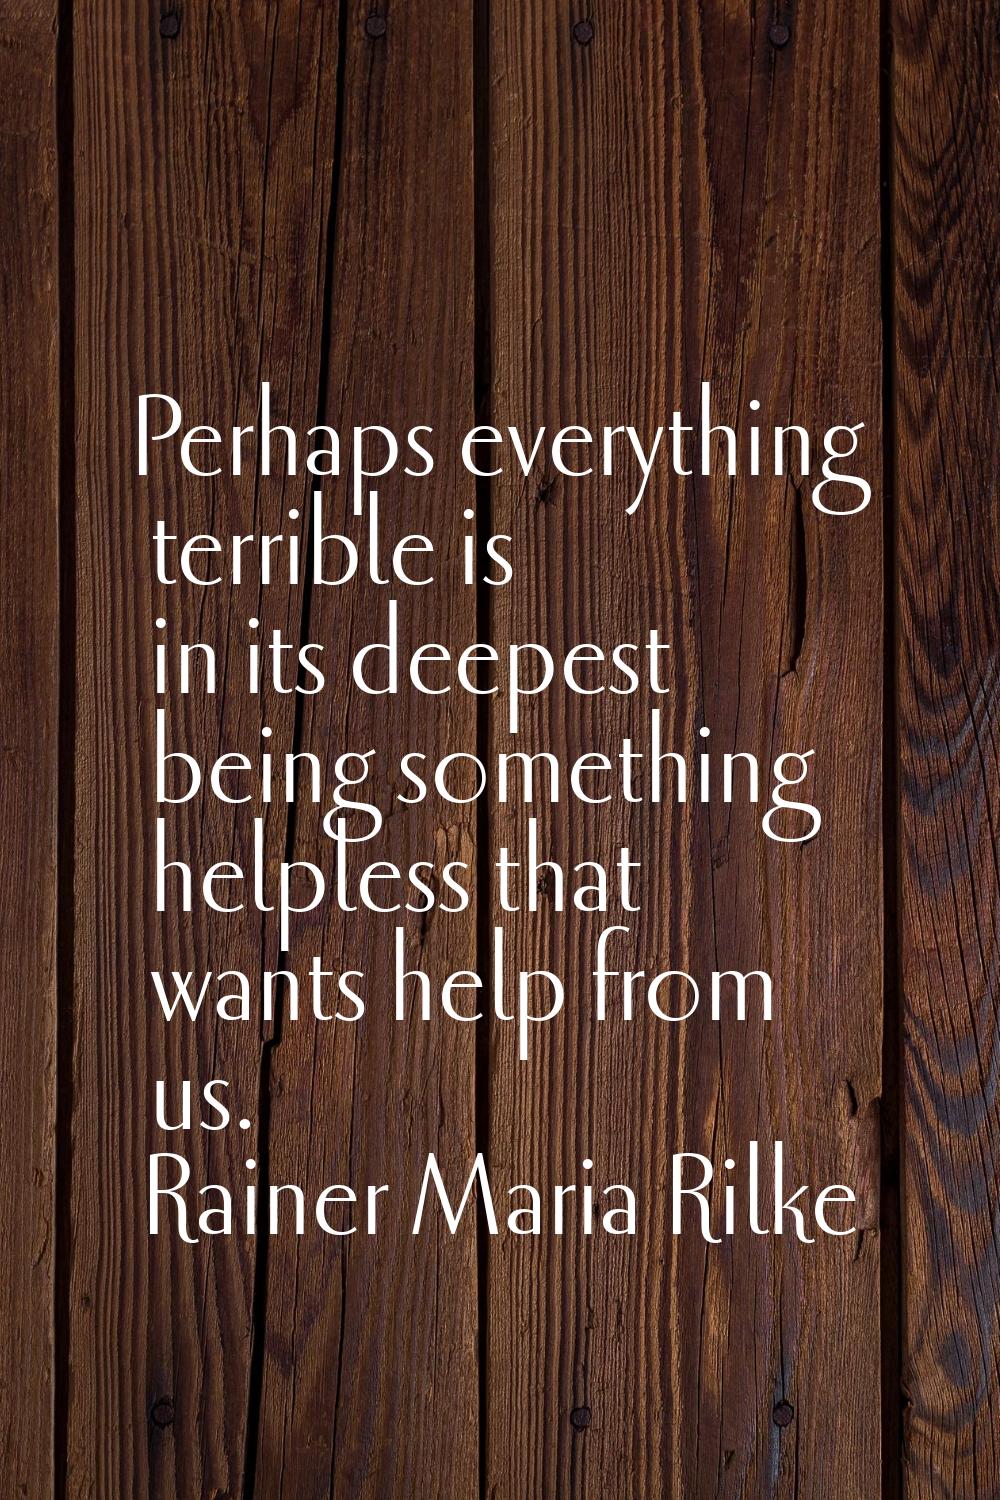 Perhaps everything terrible is in its deepest being something helpless that wants help from us.